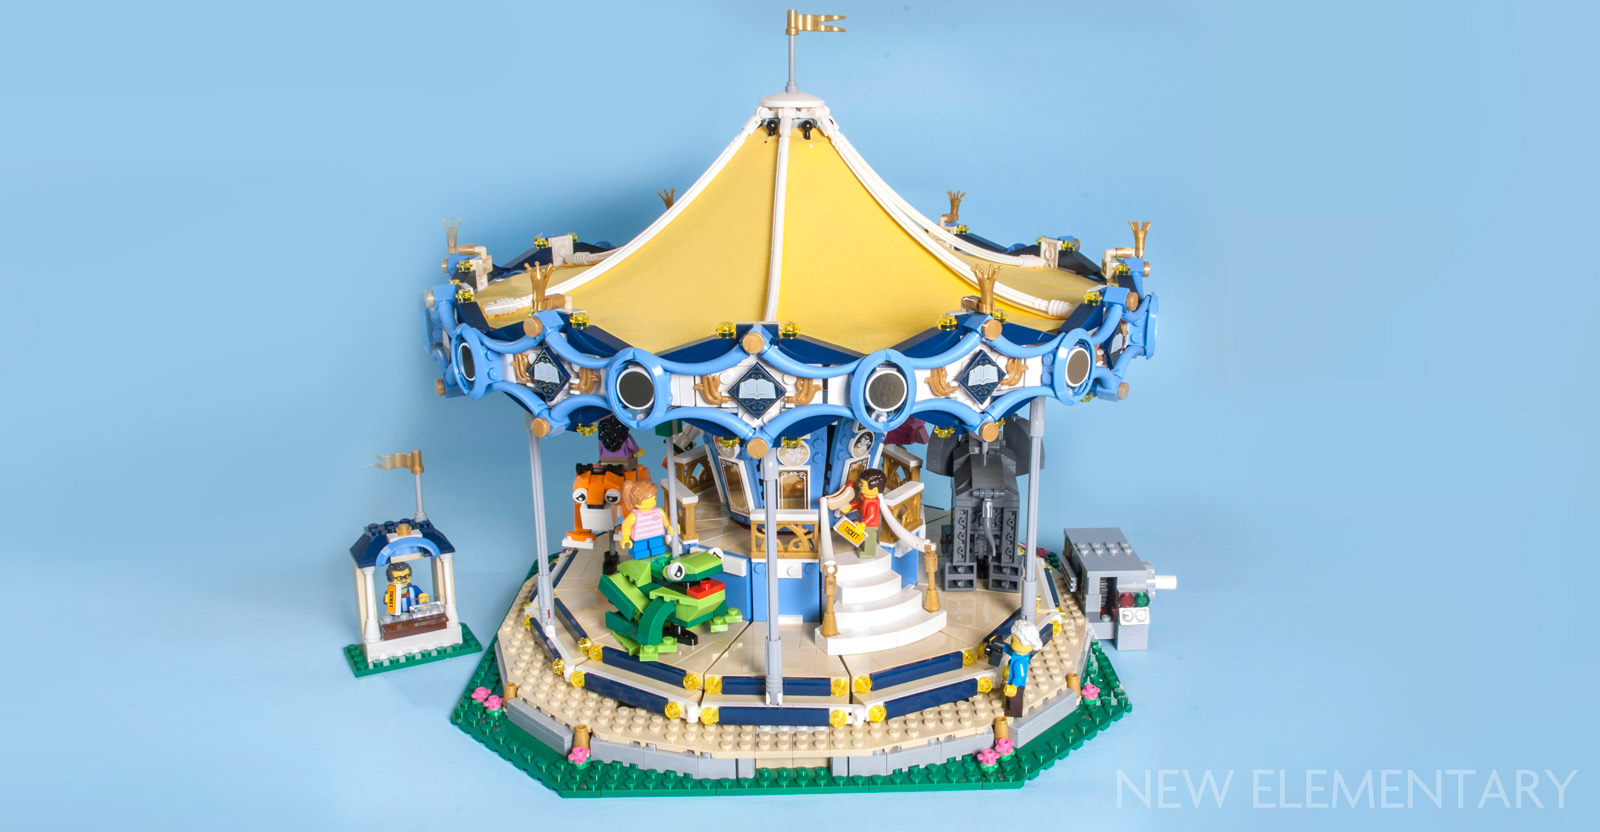 Creator 10257 Carousel New Elementary: LEGO® parts, sets and